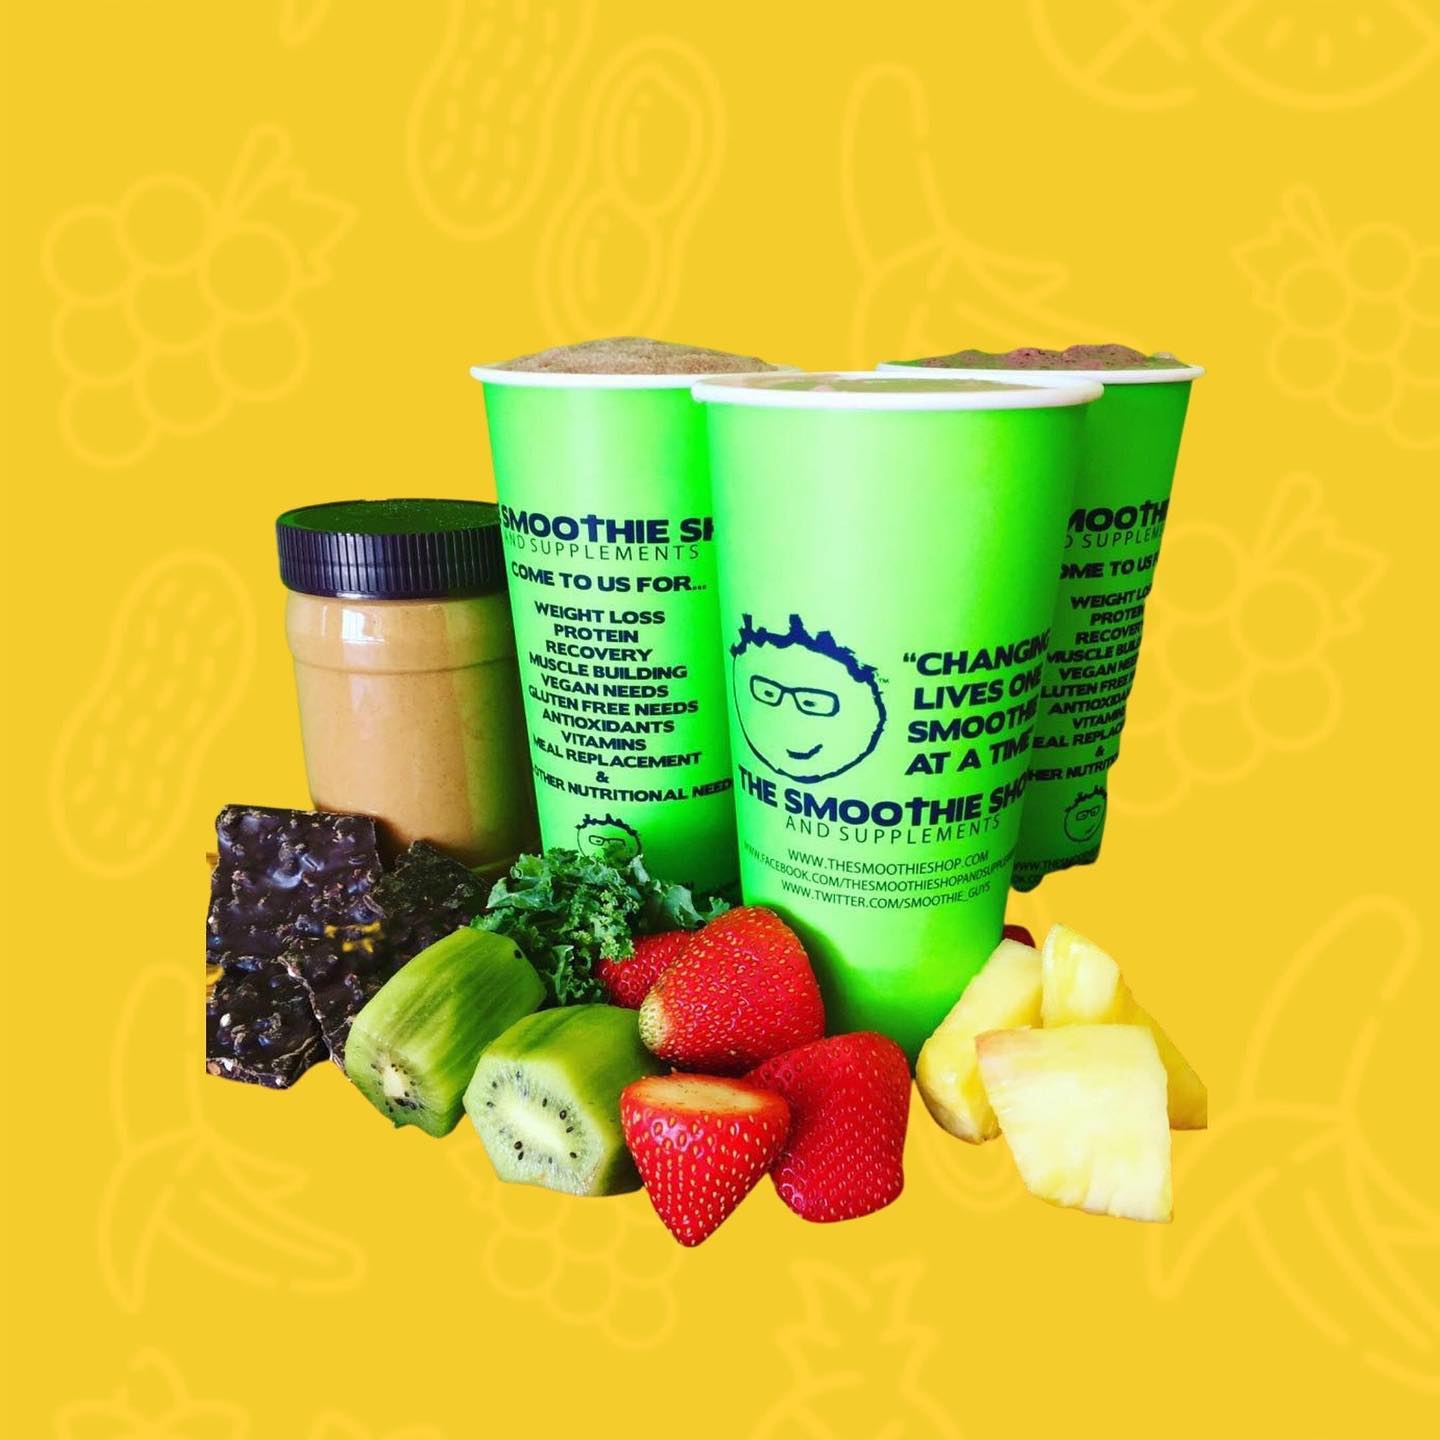 The Smoothie Shop & Supplements